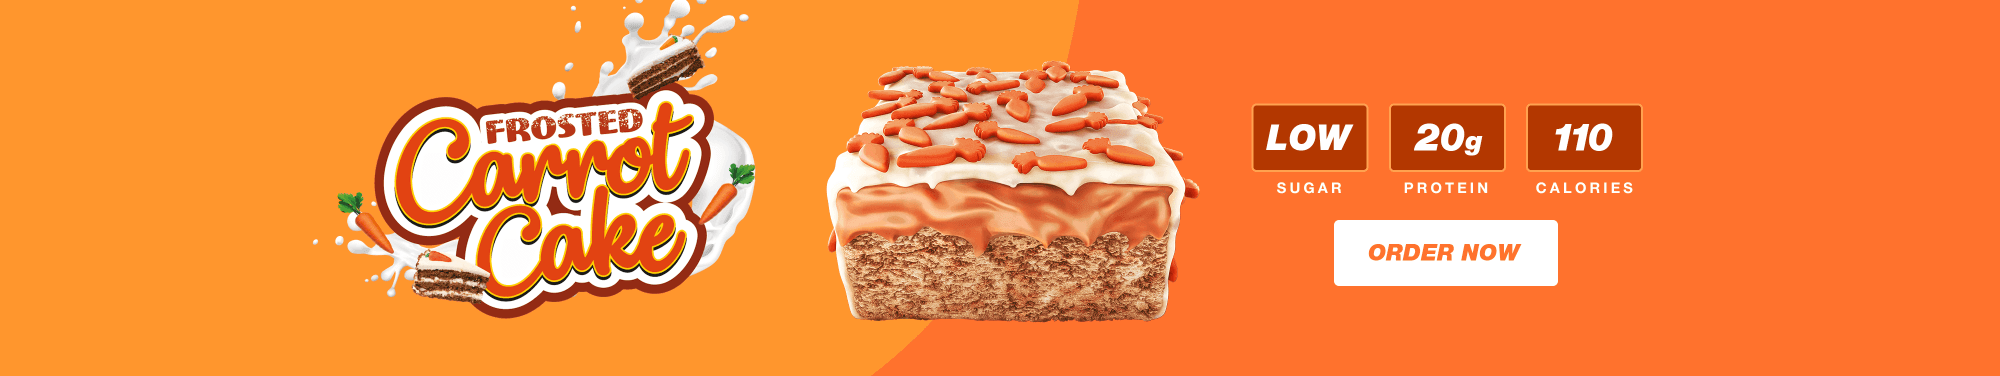 BRAND NEW Frosted Carrot Cake Battle Bite Protein Bars